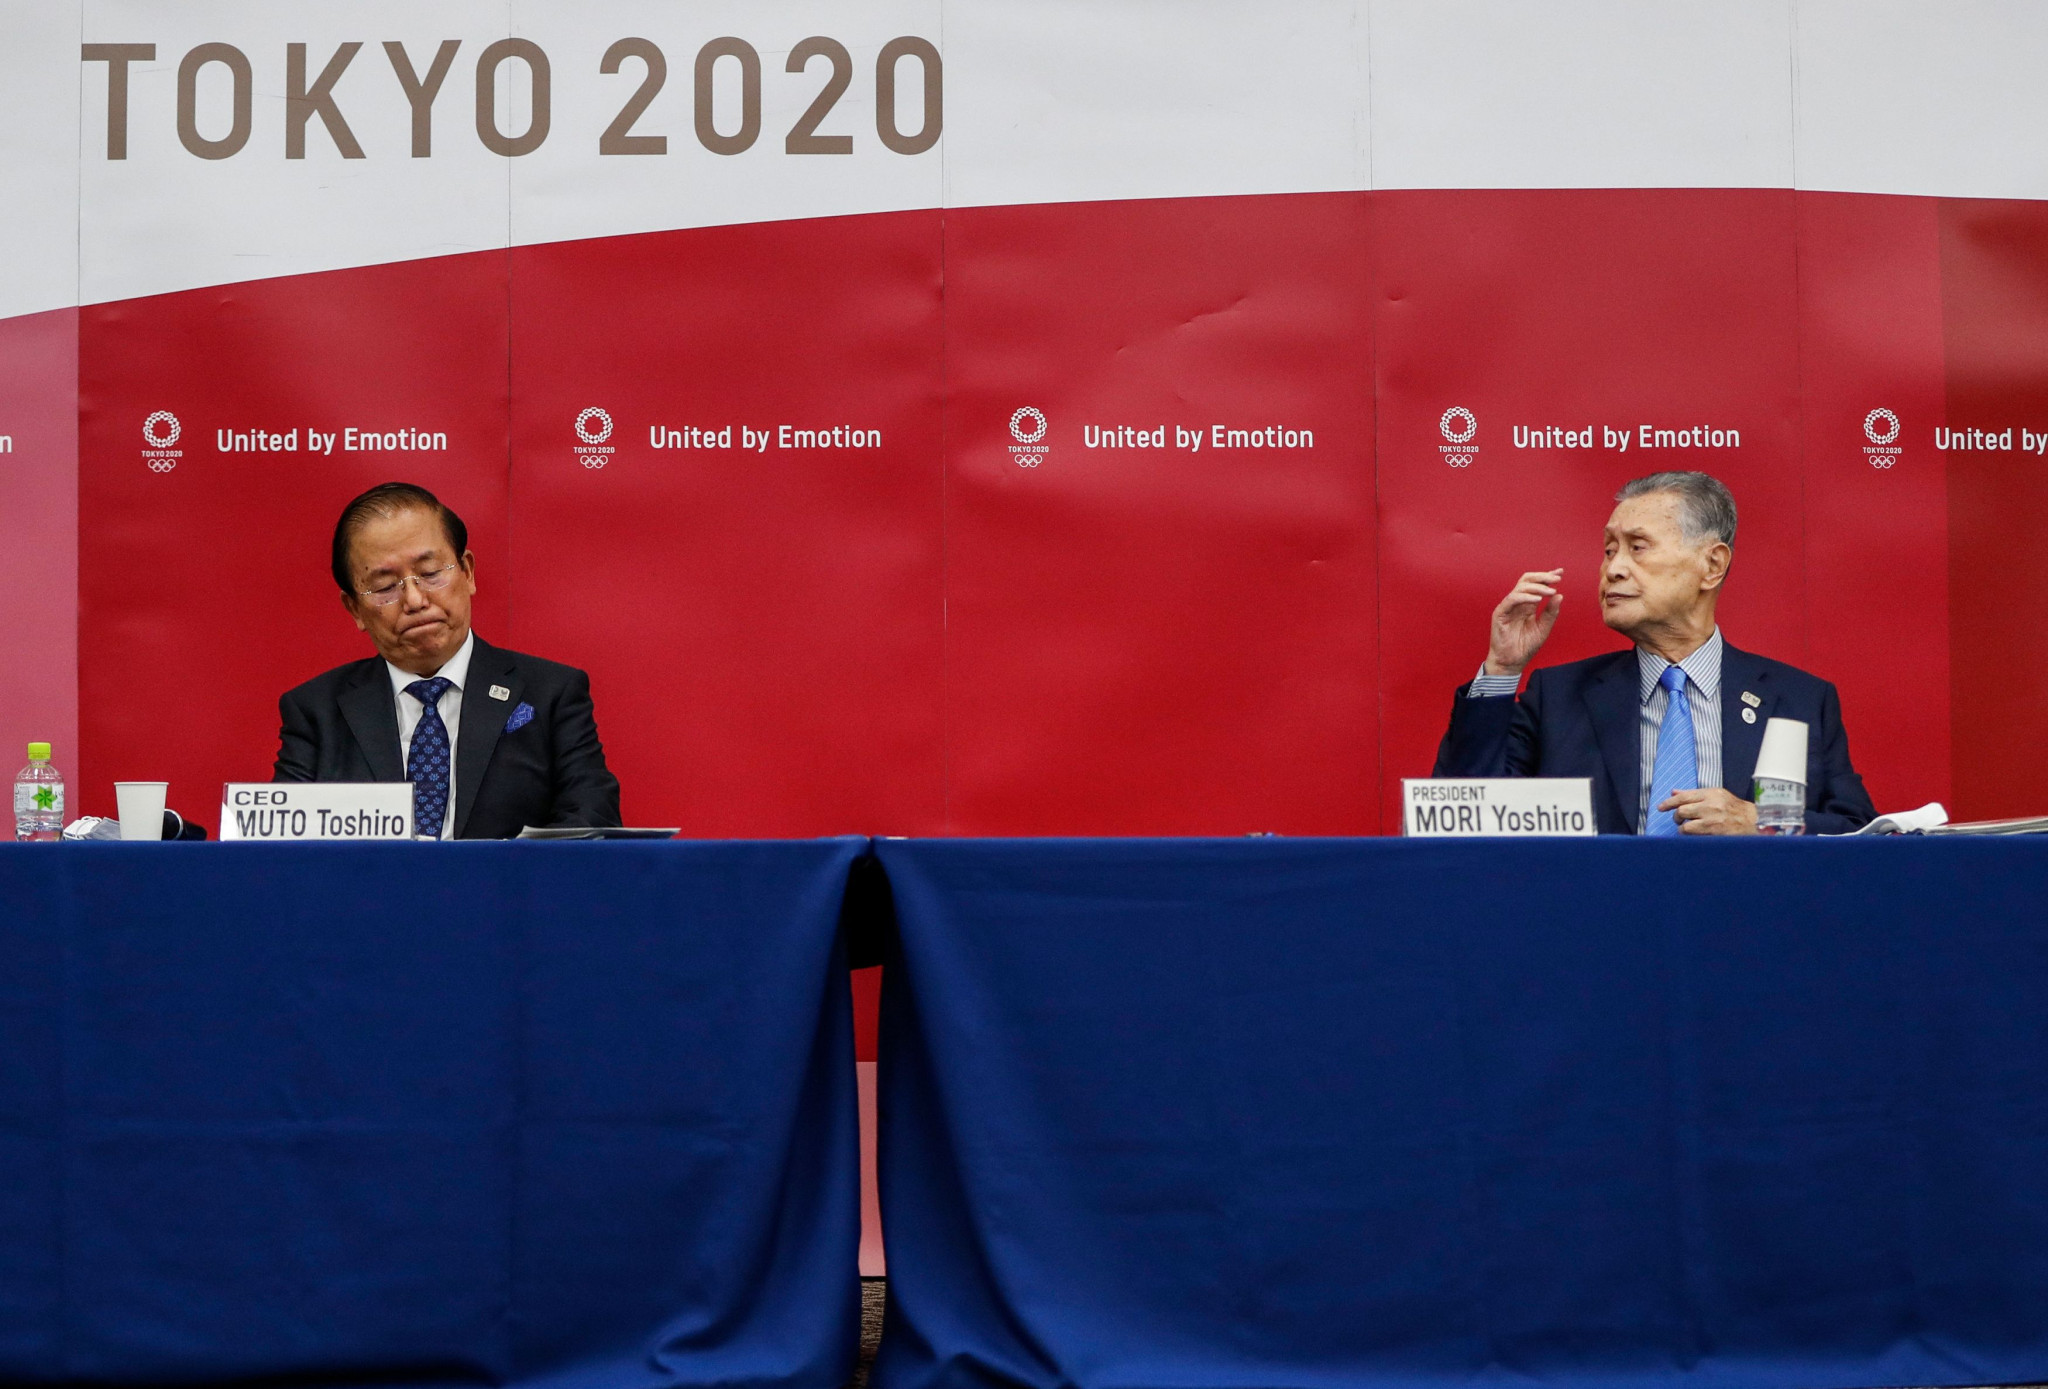 Countermeasures are likely to be a key area for Tokyo 2020 in the coming months ©Getty Images